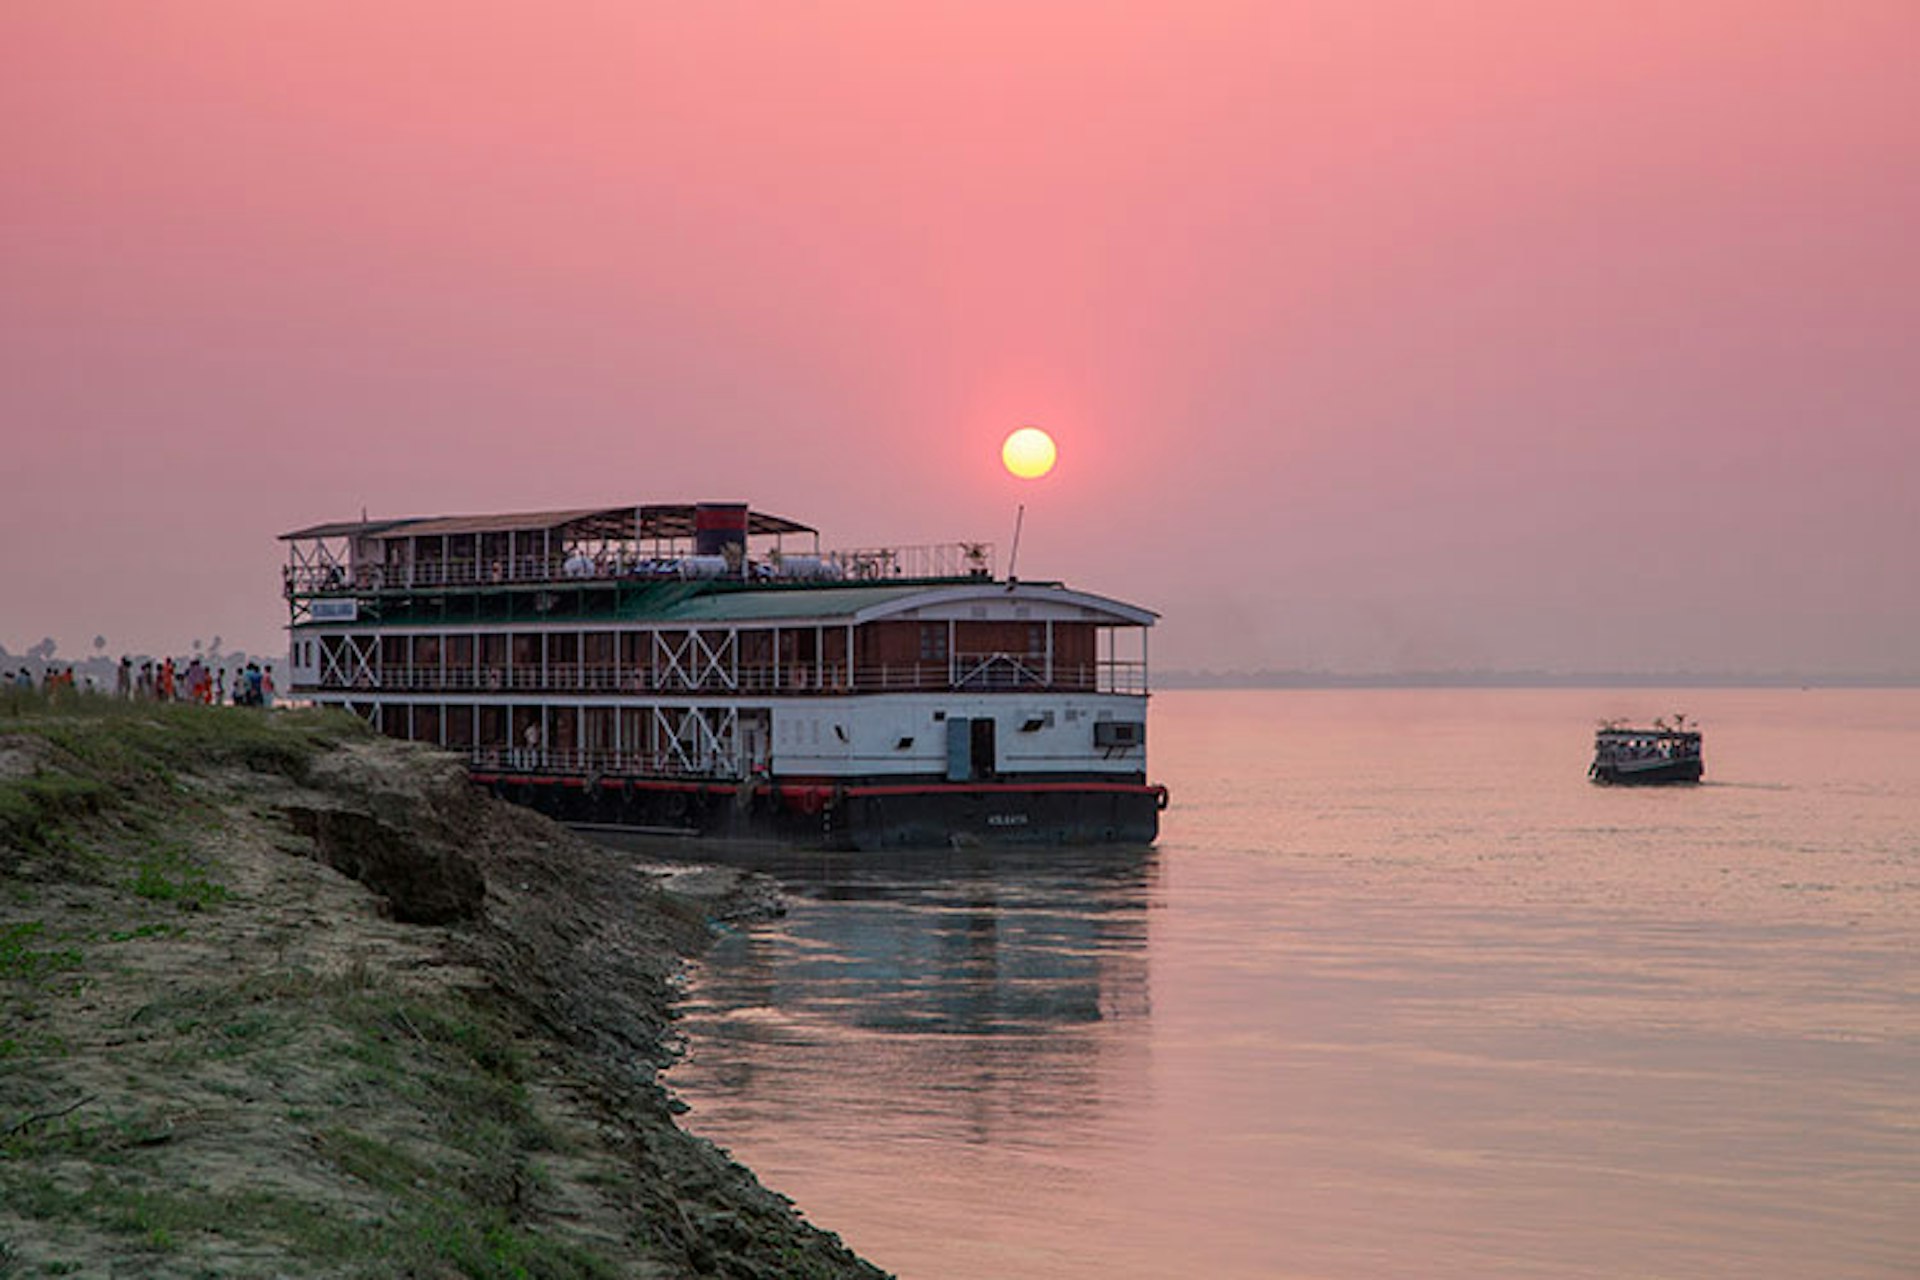 Feel the pulse of India by cruising along the River Ganges. Image by Holger Leue / Lonely Planet Images / Getty Images